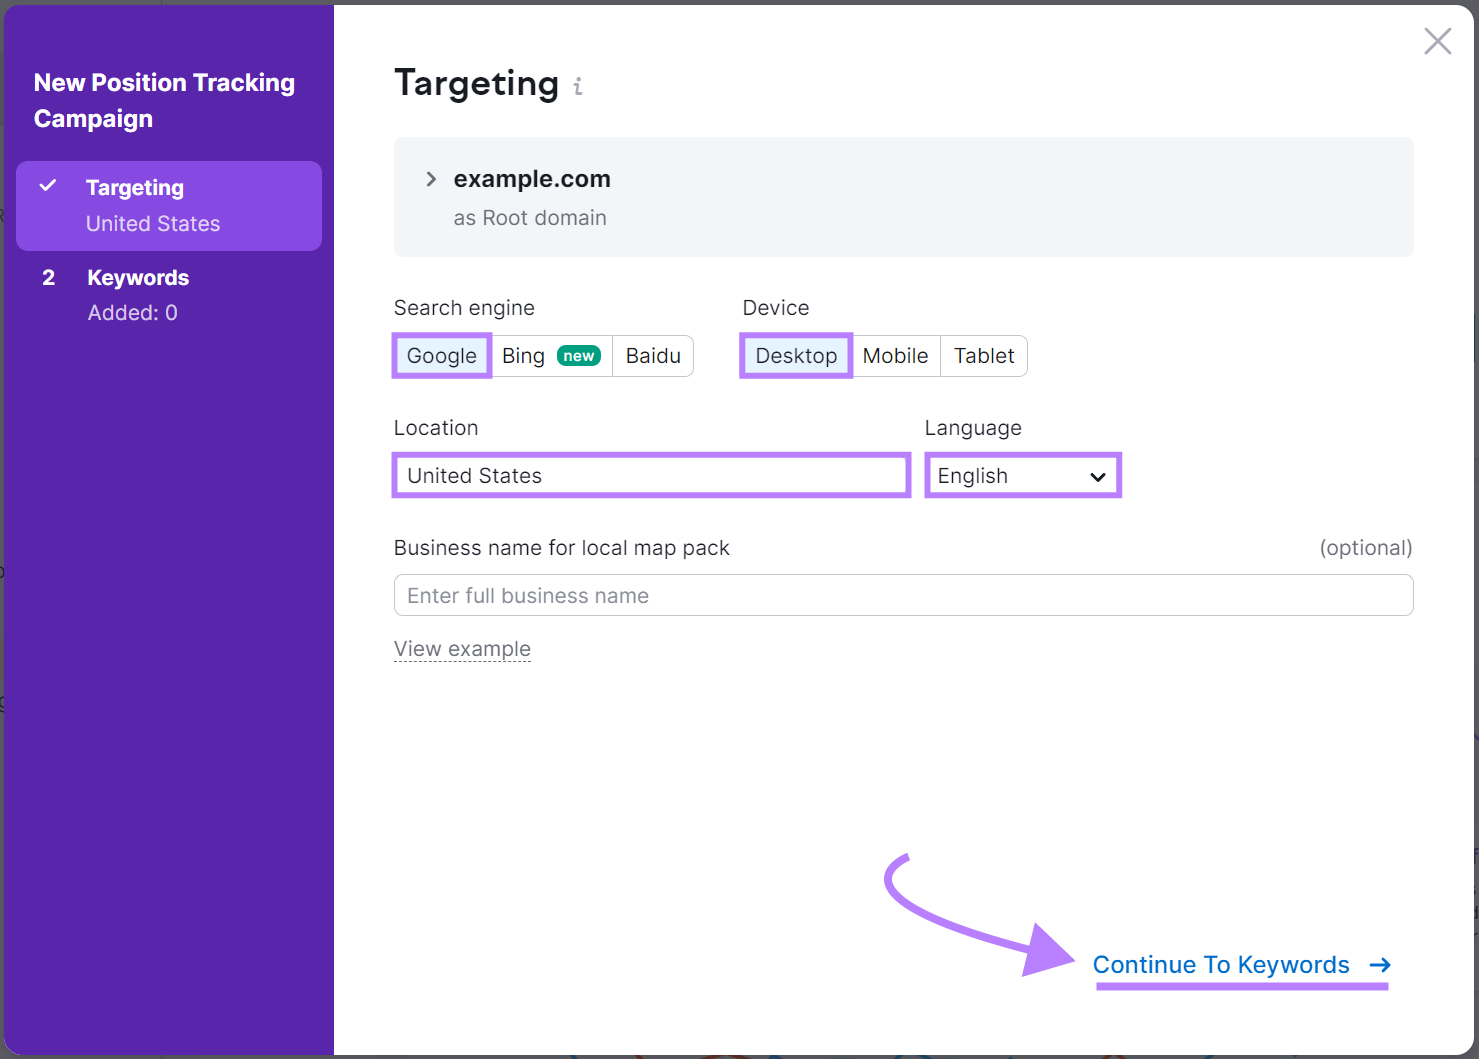 "Targeting" window in Position Tracking tool settings